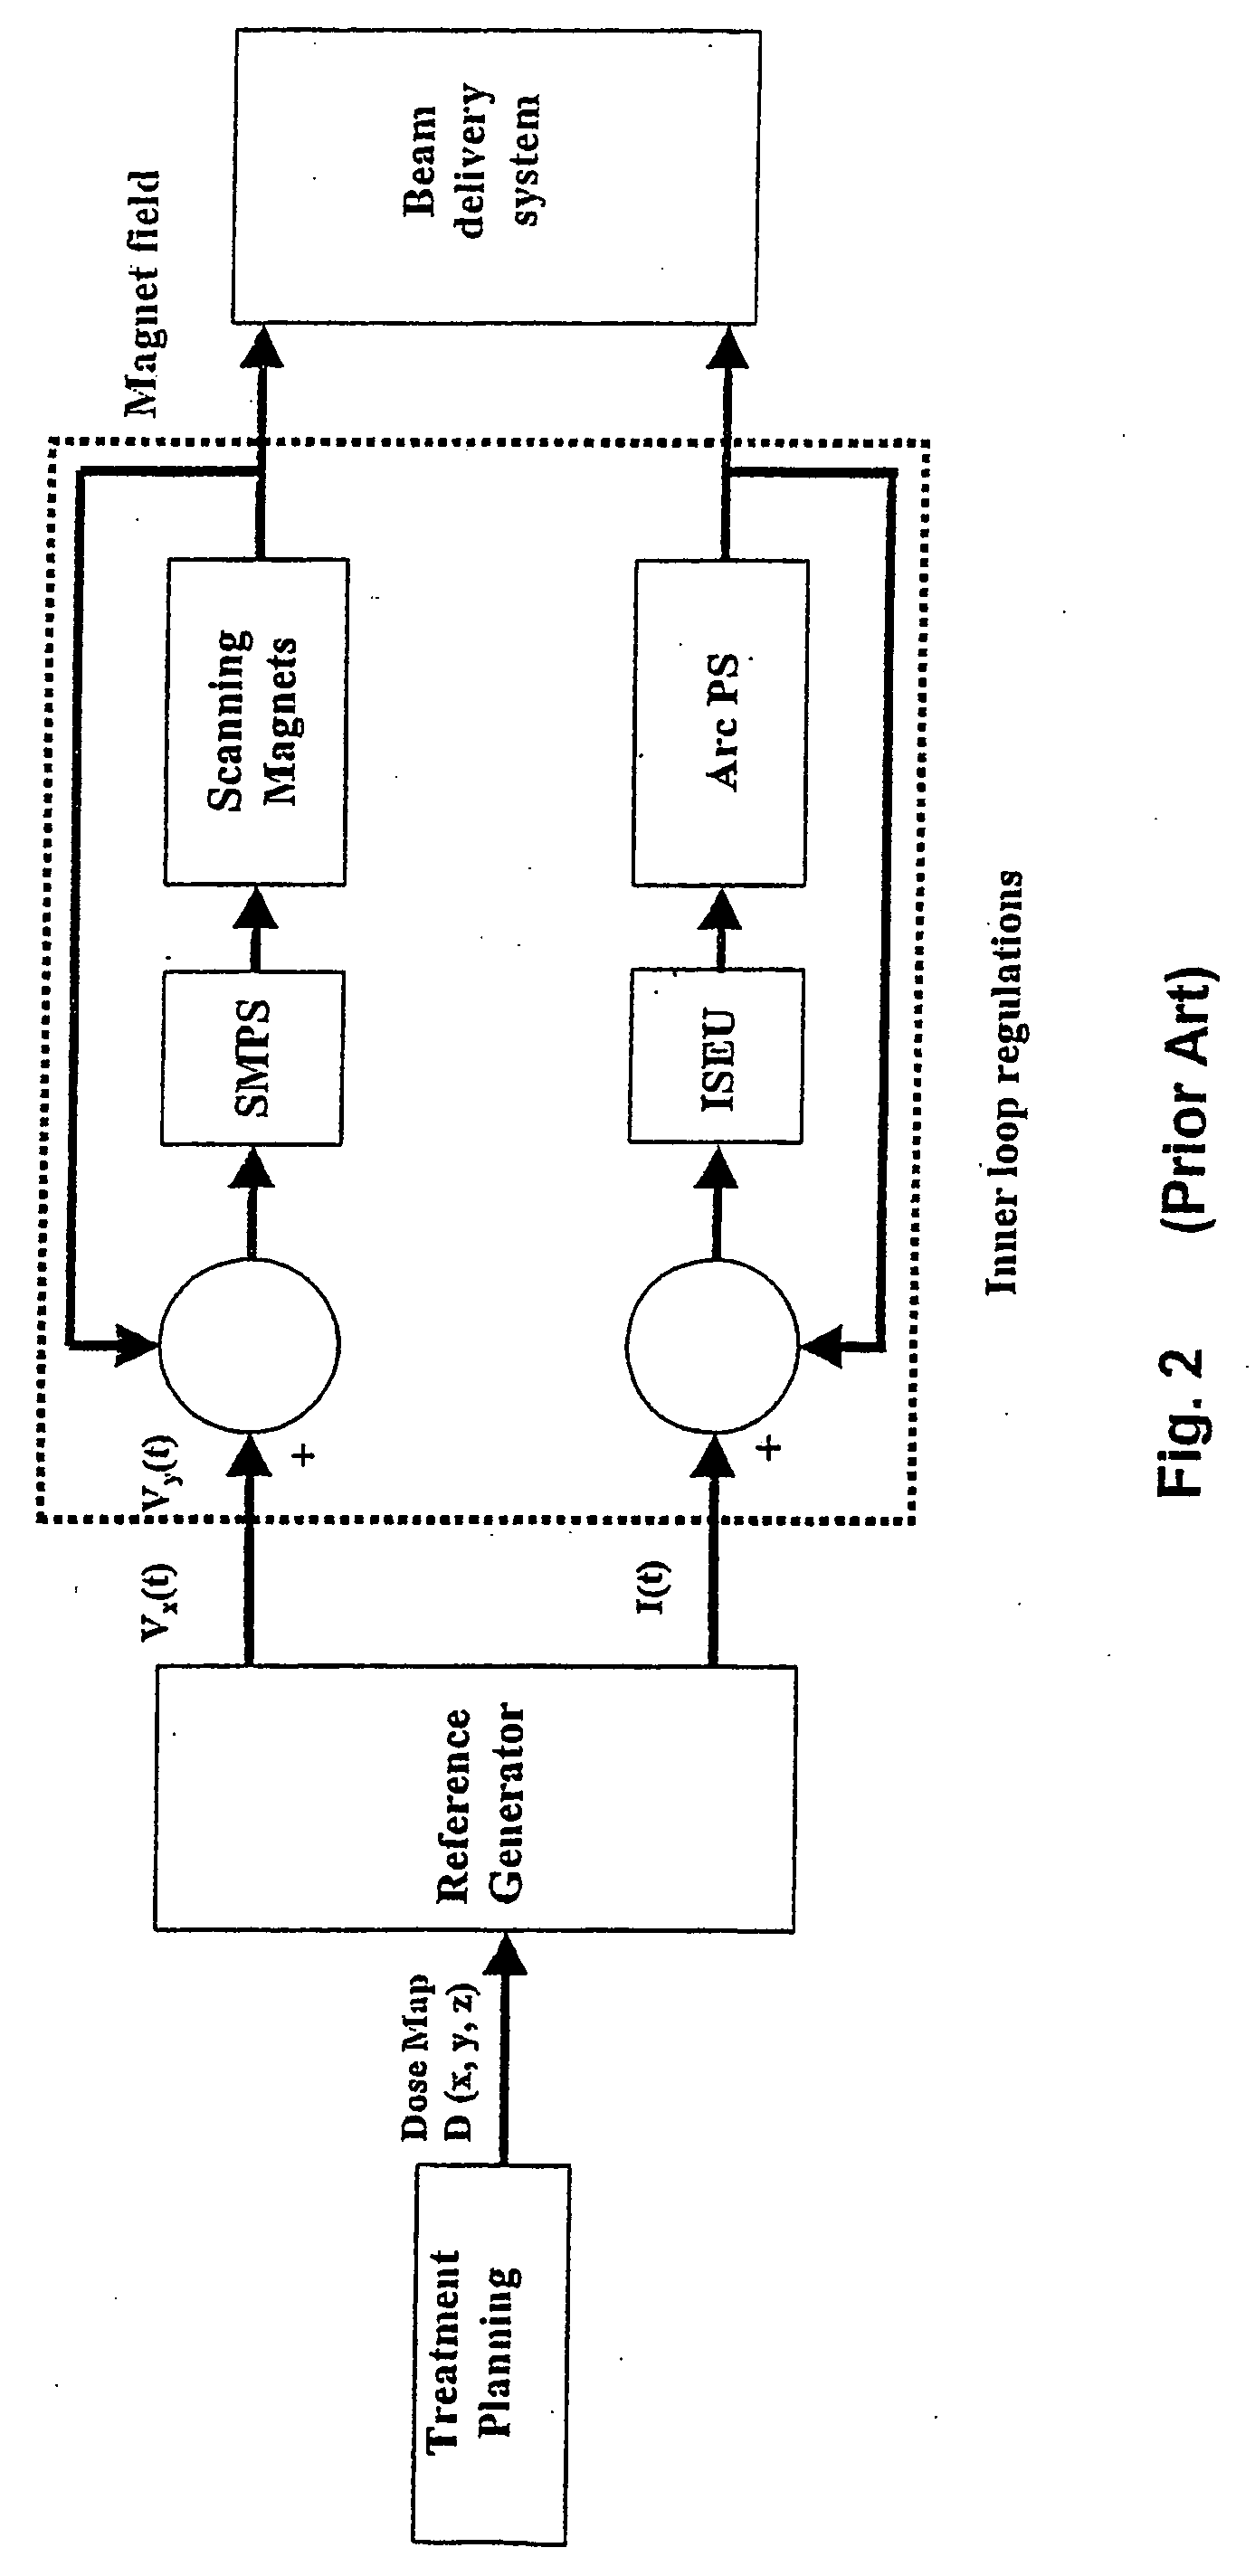 Apparatus for irradiating a target volume